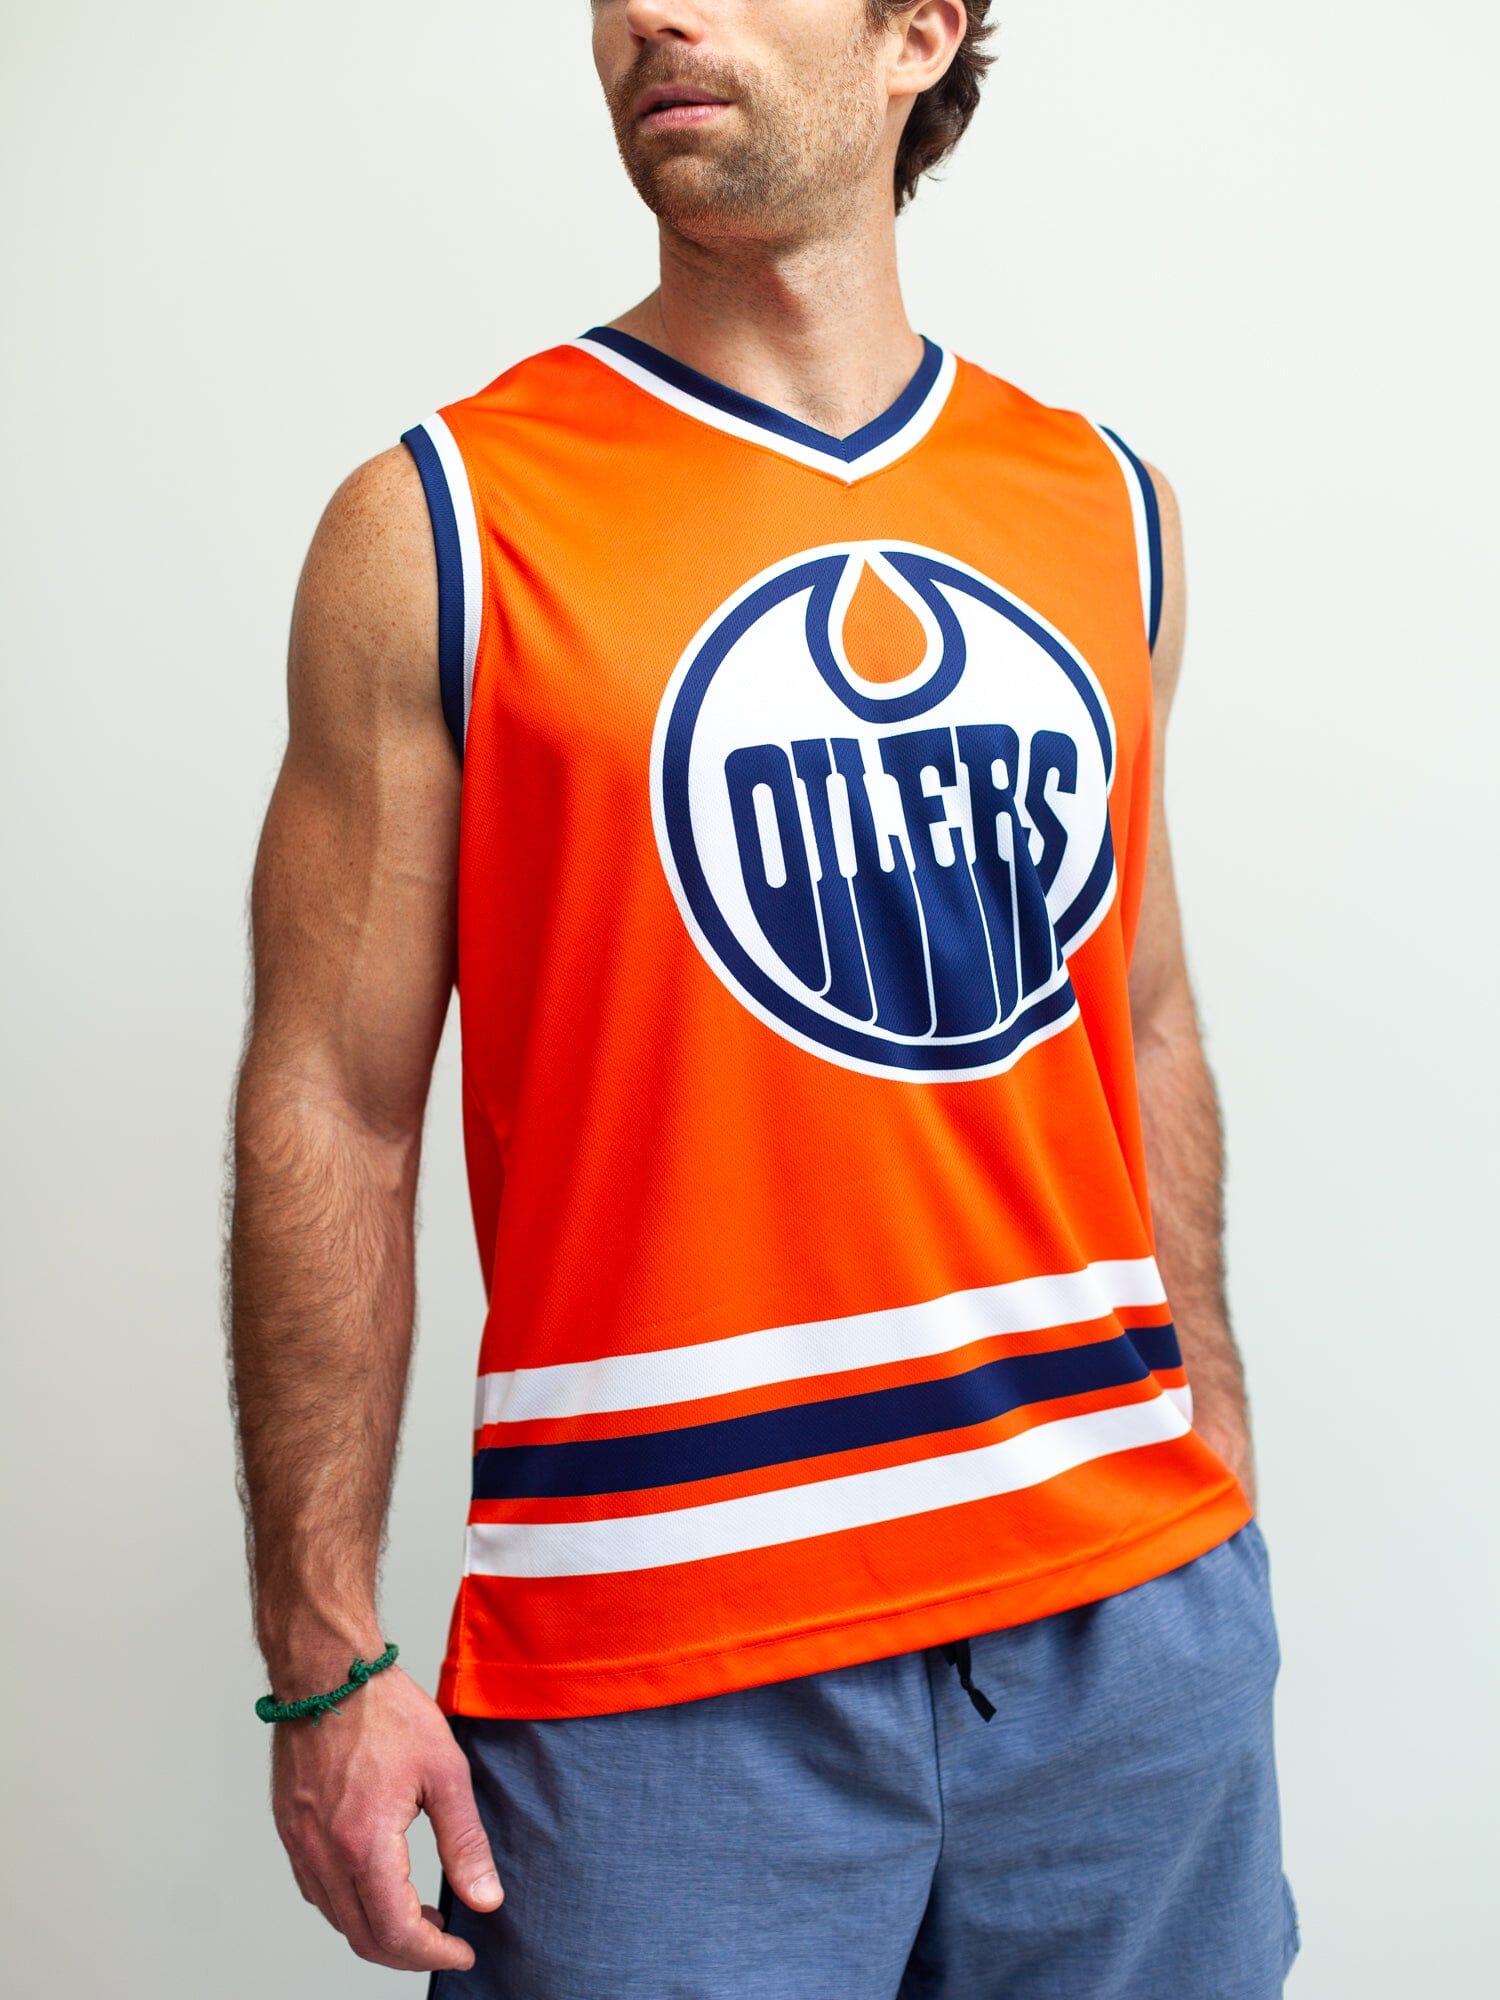 Edmonton Oilers - The Official #Oilers Team Store is now